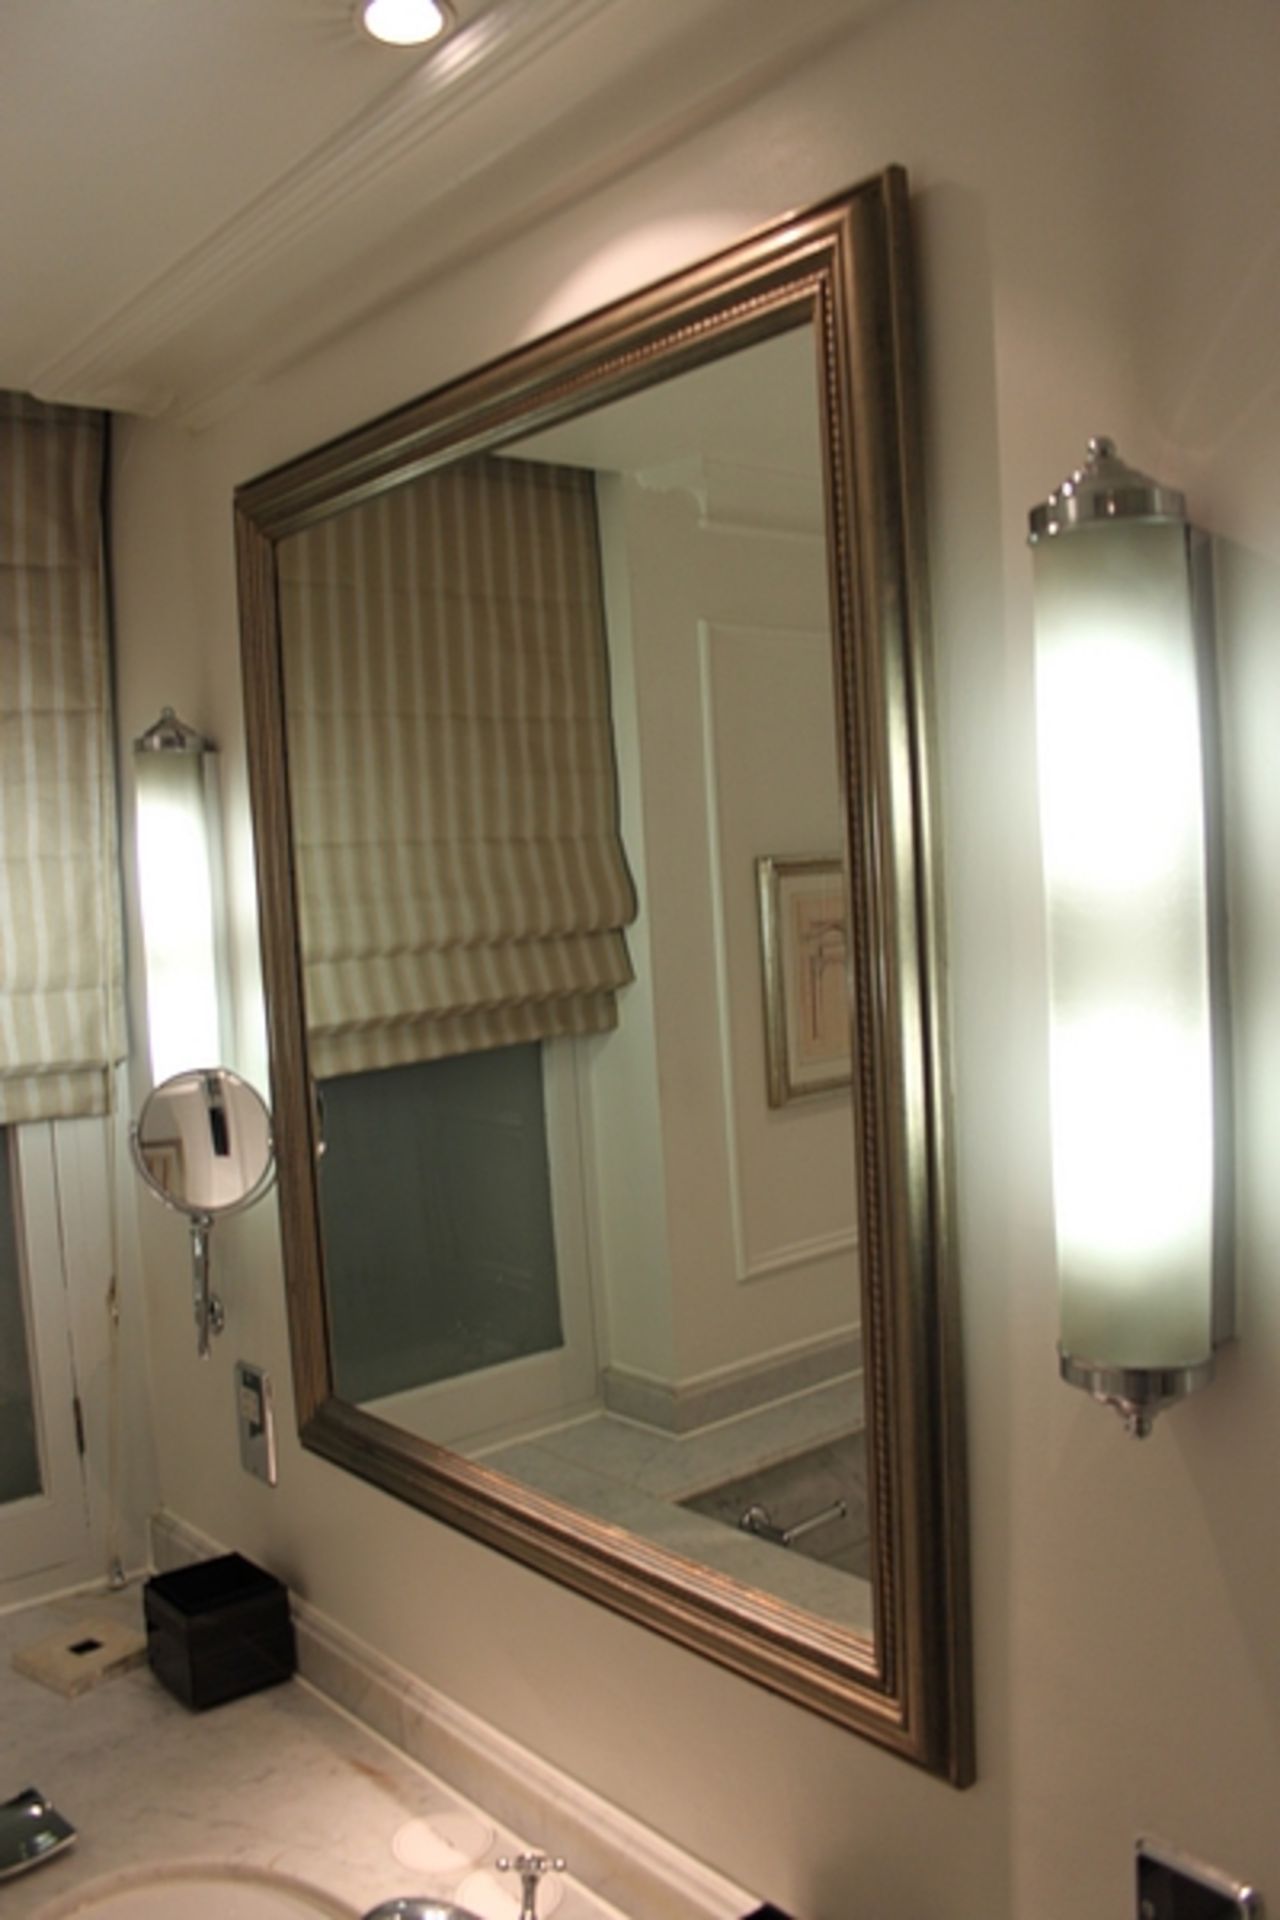 A large contemporary wall mirror in a silver wood framed with its beautiful designs and unique